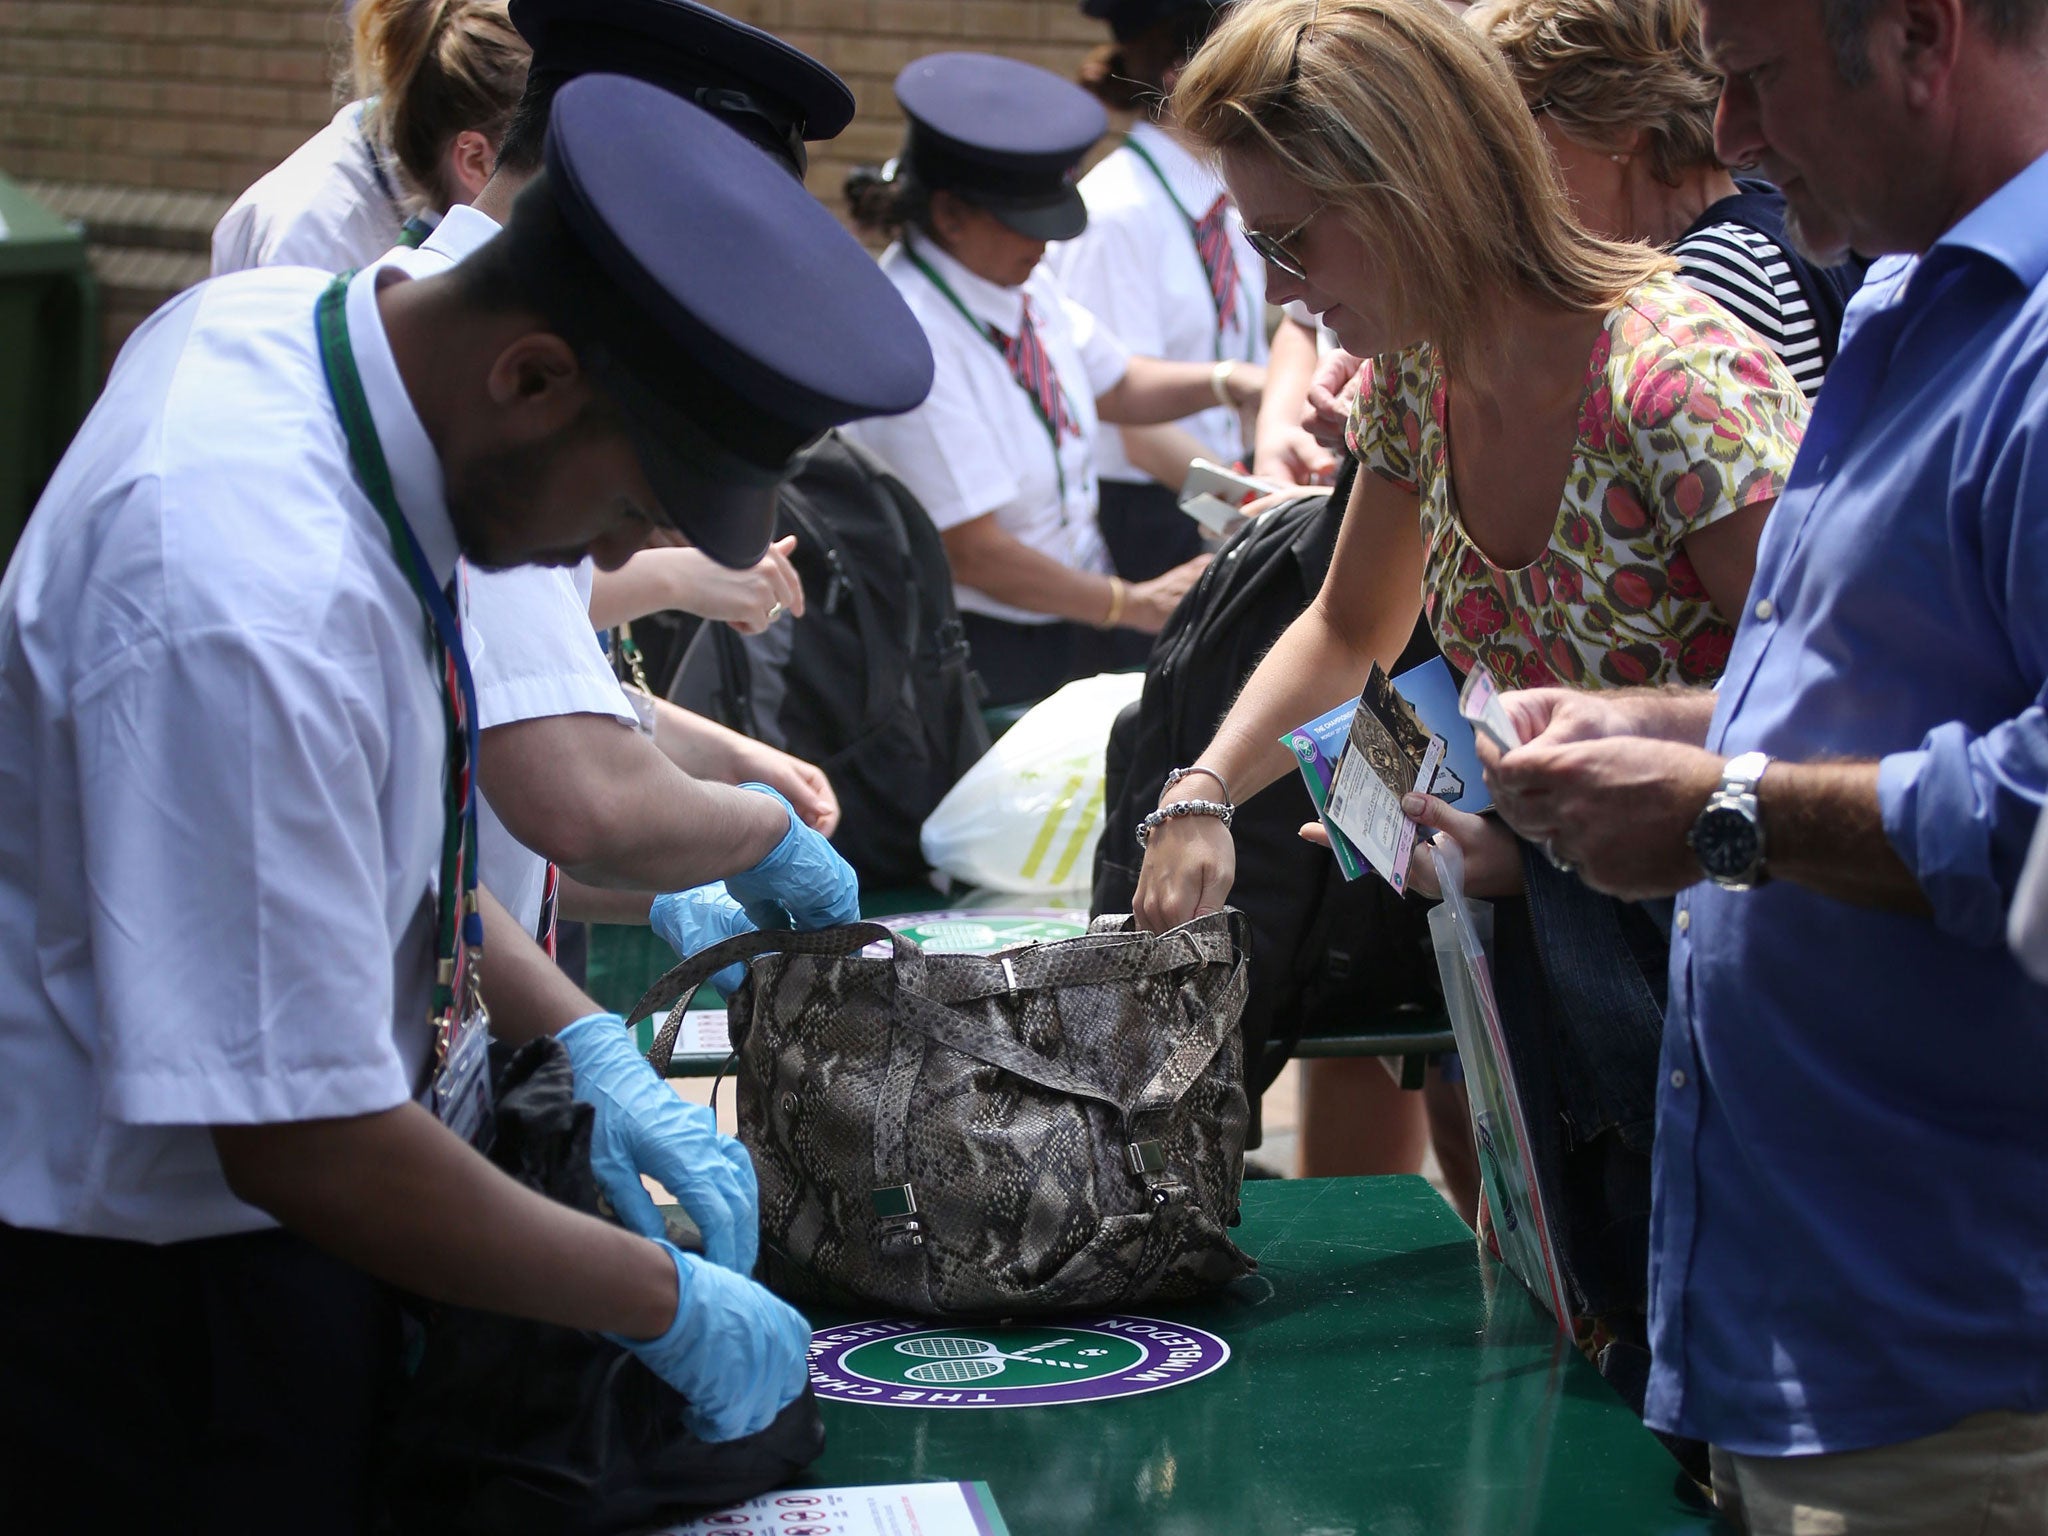 Bags being searched during day two of the Wimbledon Championships at the All England Lawn Tennis and Croquet Club, Wimbledon